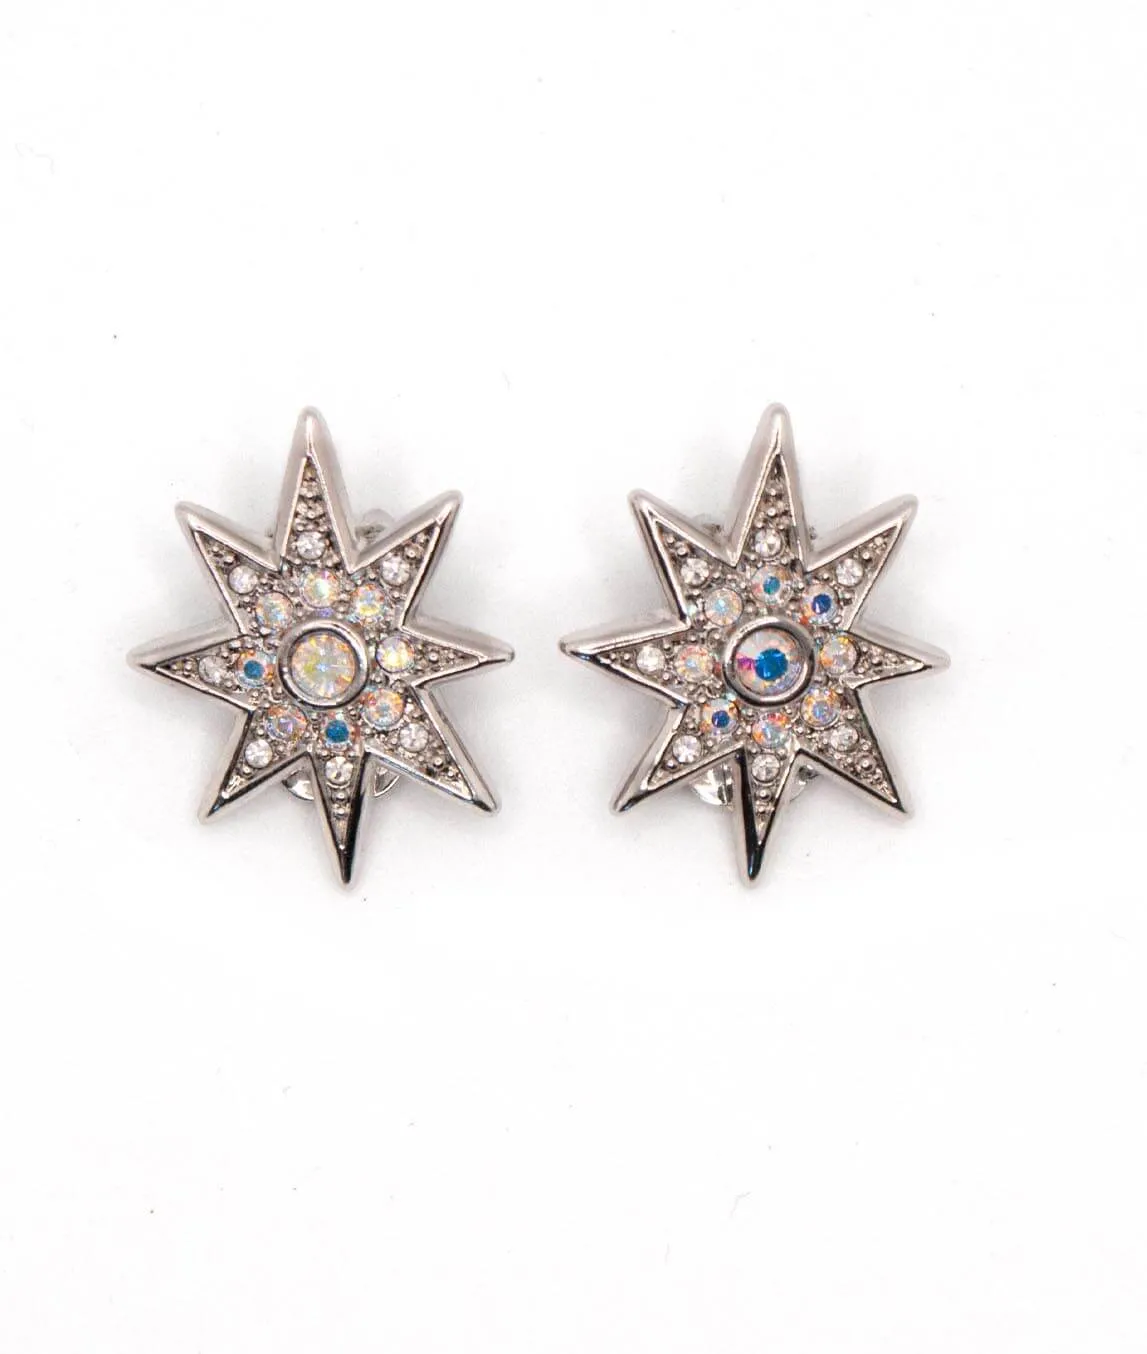 Christian Dior Crystal and Star La Petite Tribale Earrings  Rent Christian  Dior jewelry for 55month